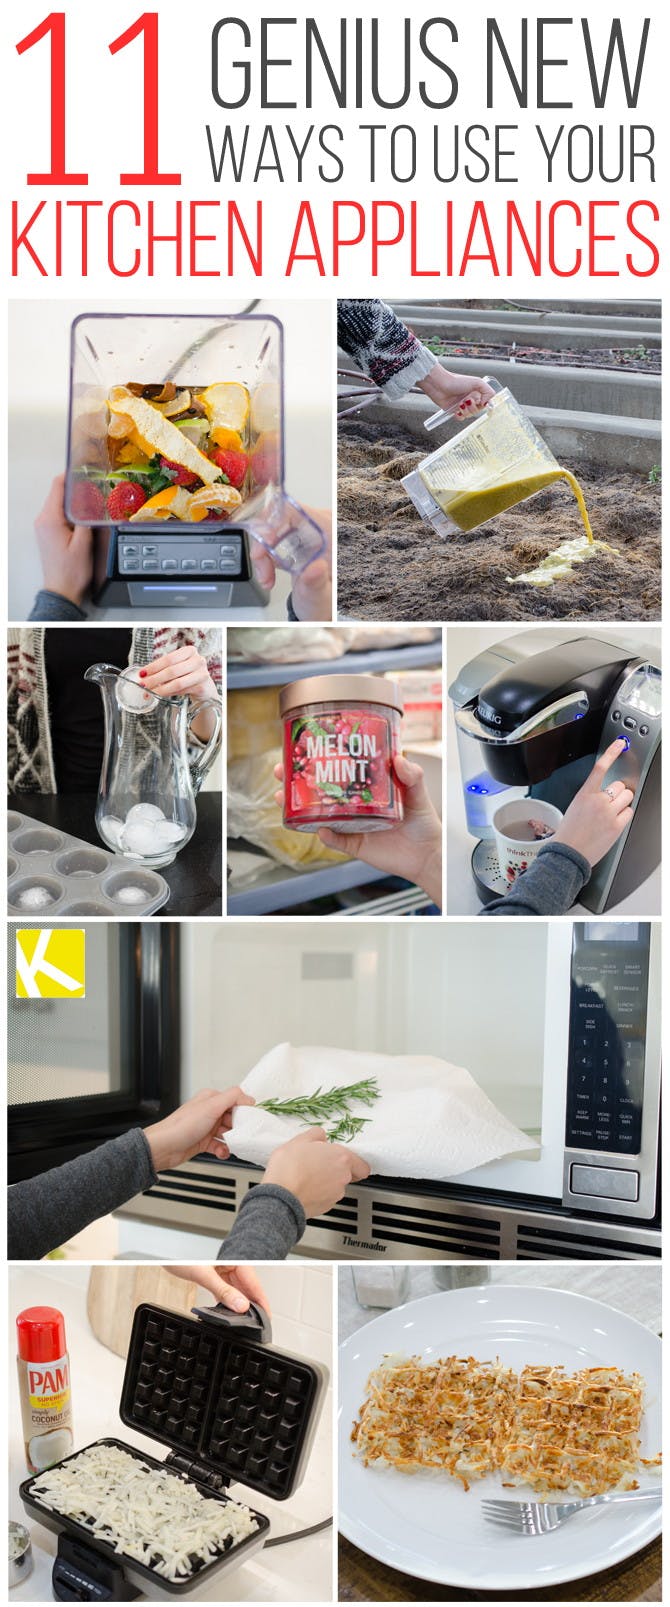 11 Mind-Blowing Kitchen Appliance Hacks You Must Try